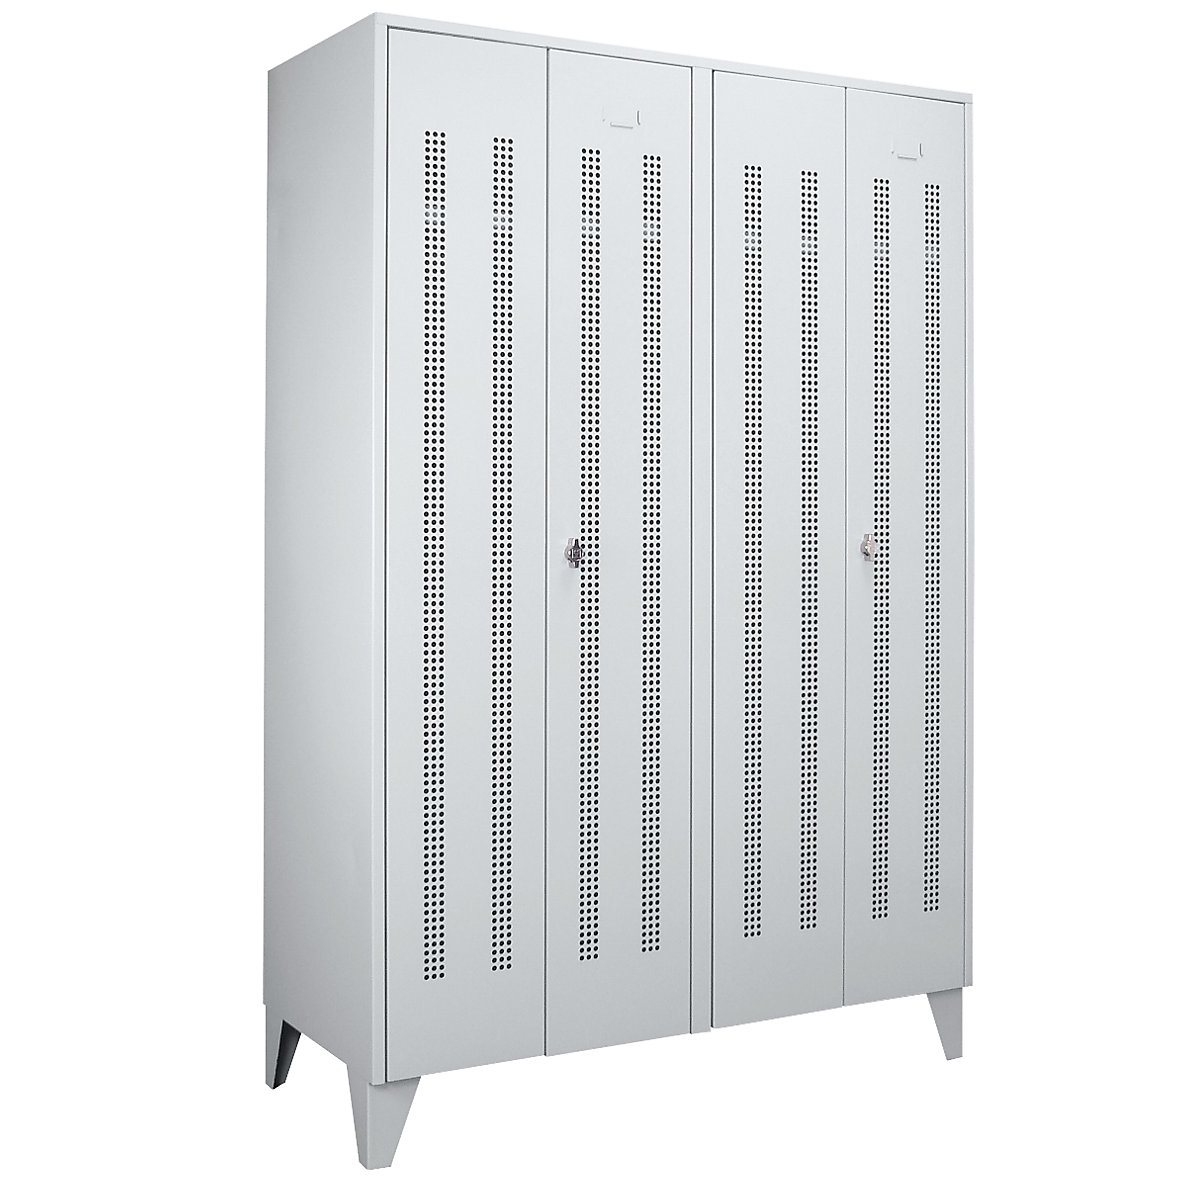 Steel locker with stud feet – Wolf, full height compartments, perforated sheet metal doors, compartment width 600 mm, 2 compartments, light grey-59